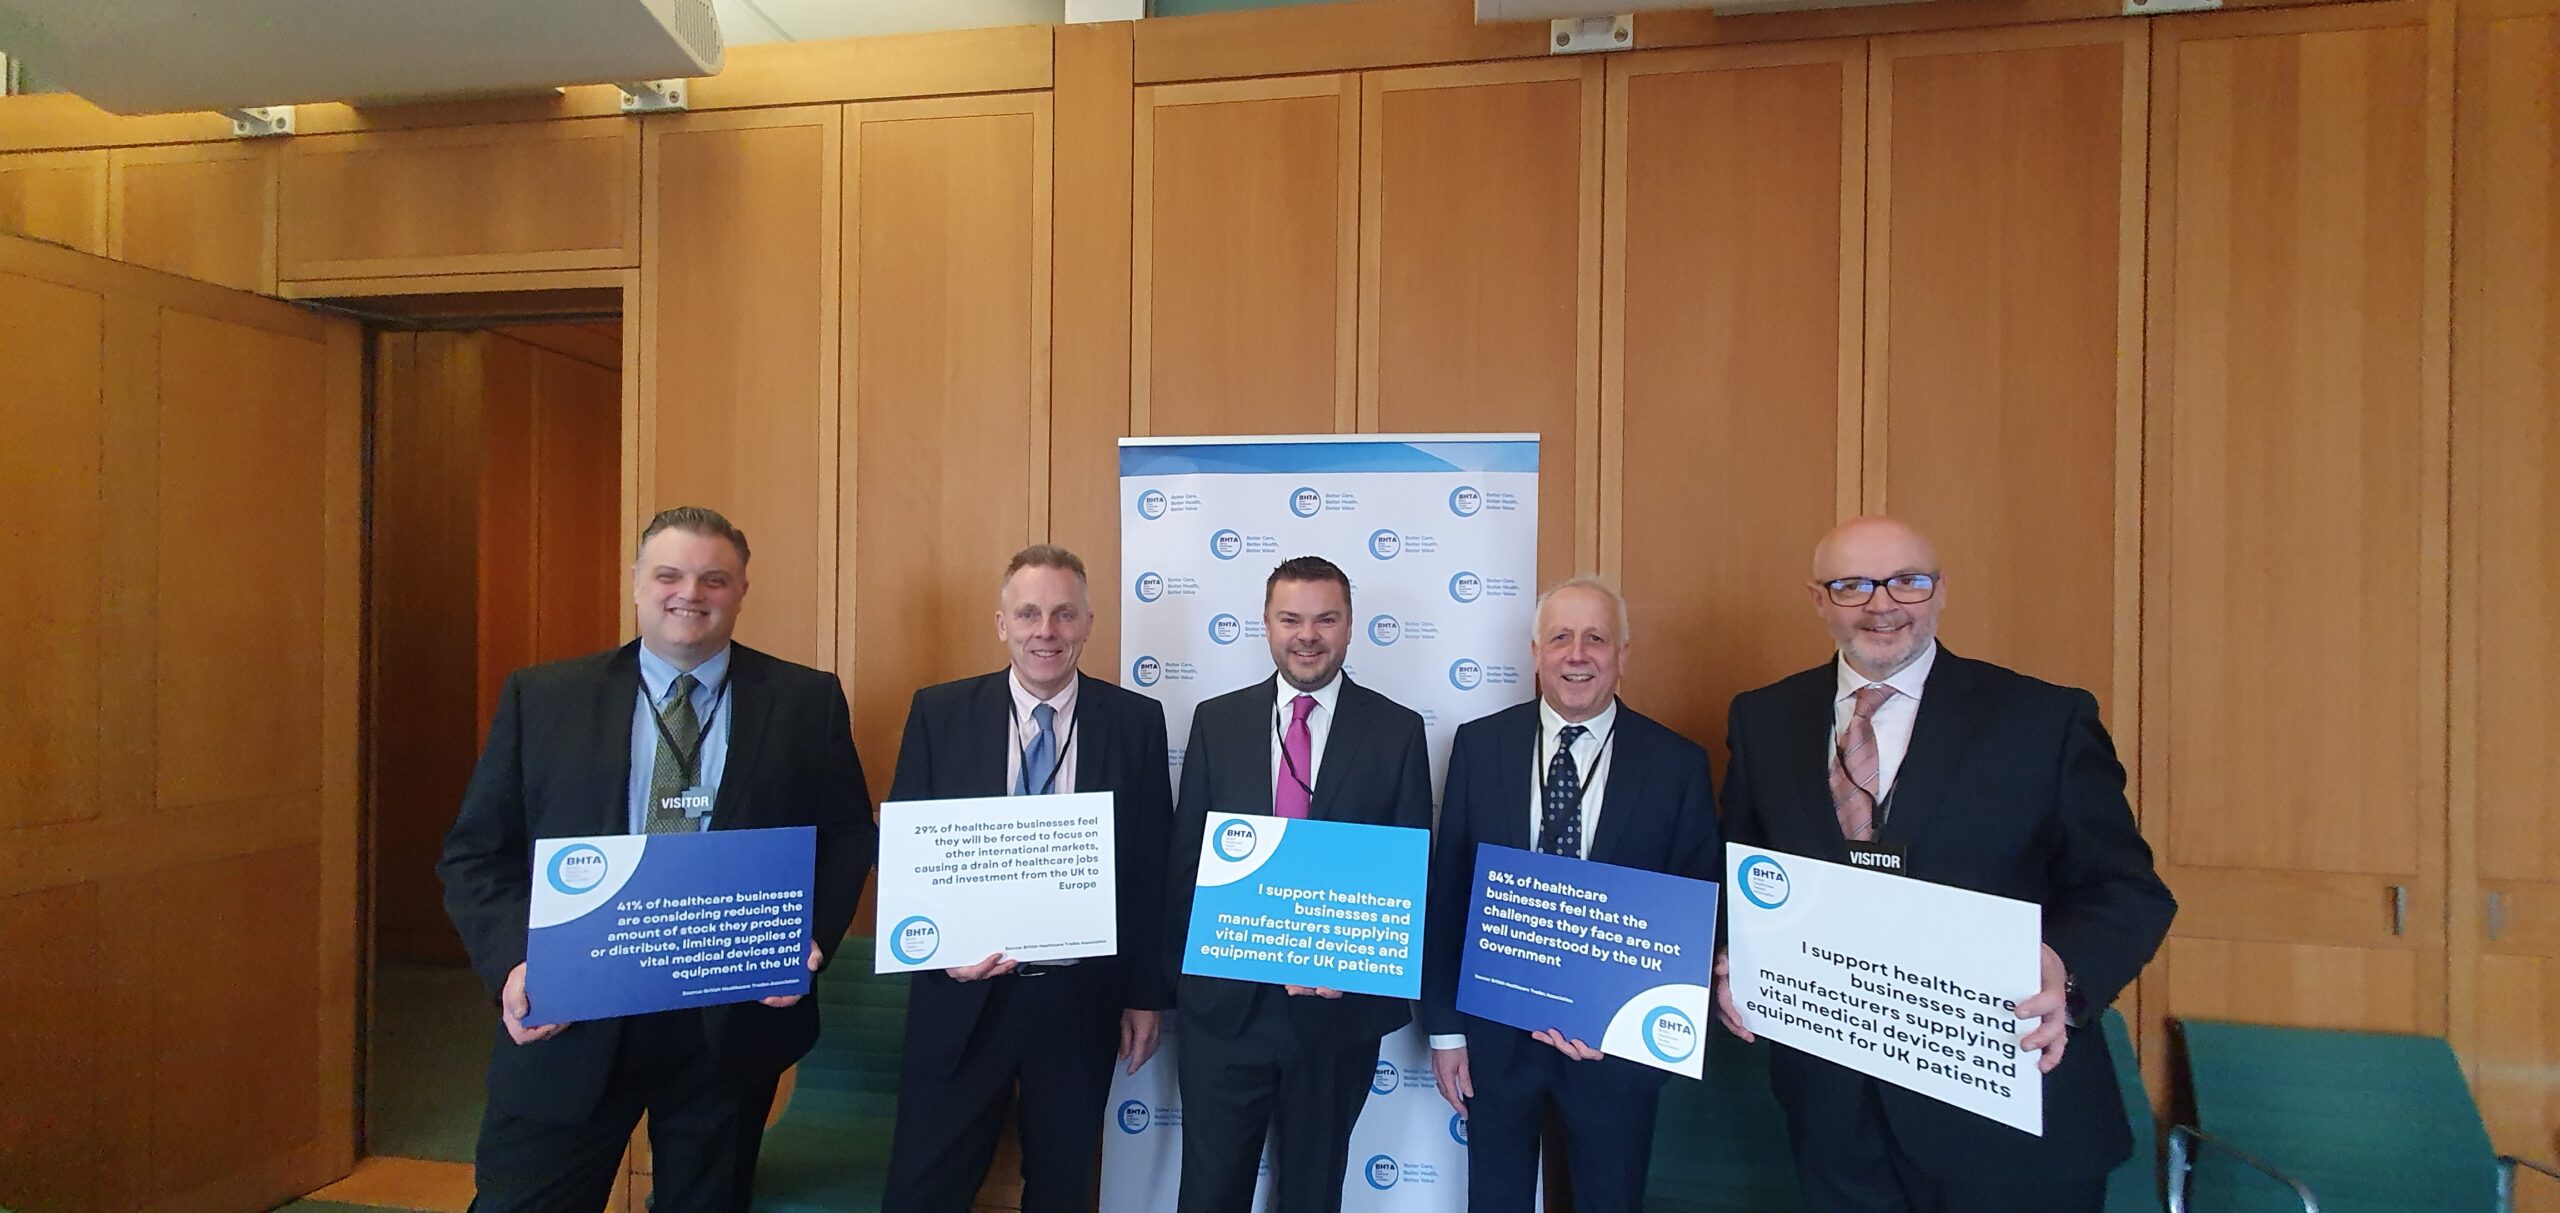 BHTA Parliamentary drop-in event: in pictures